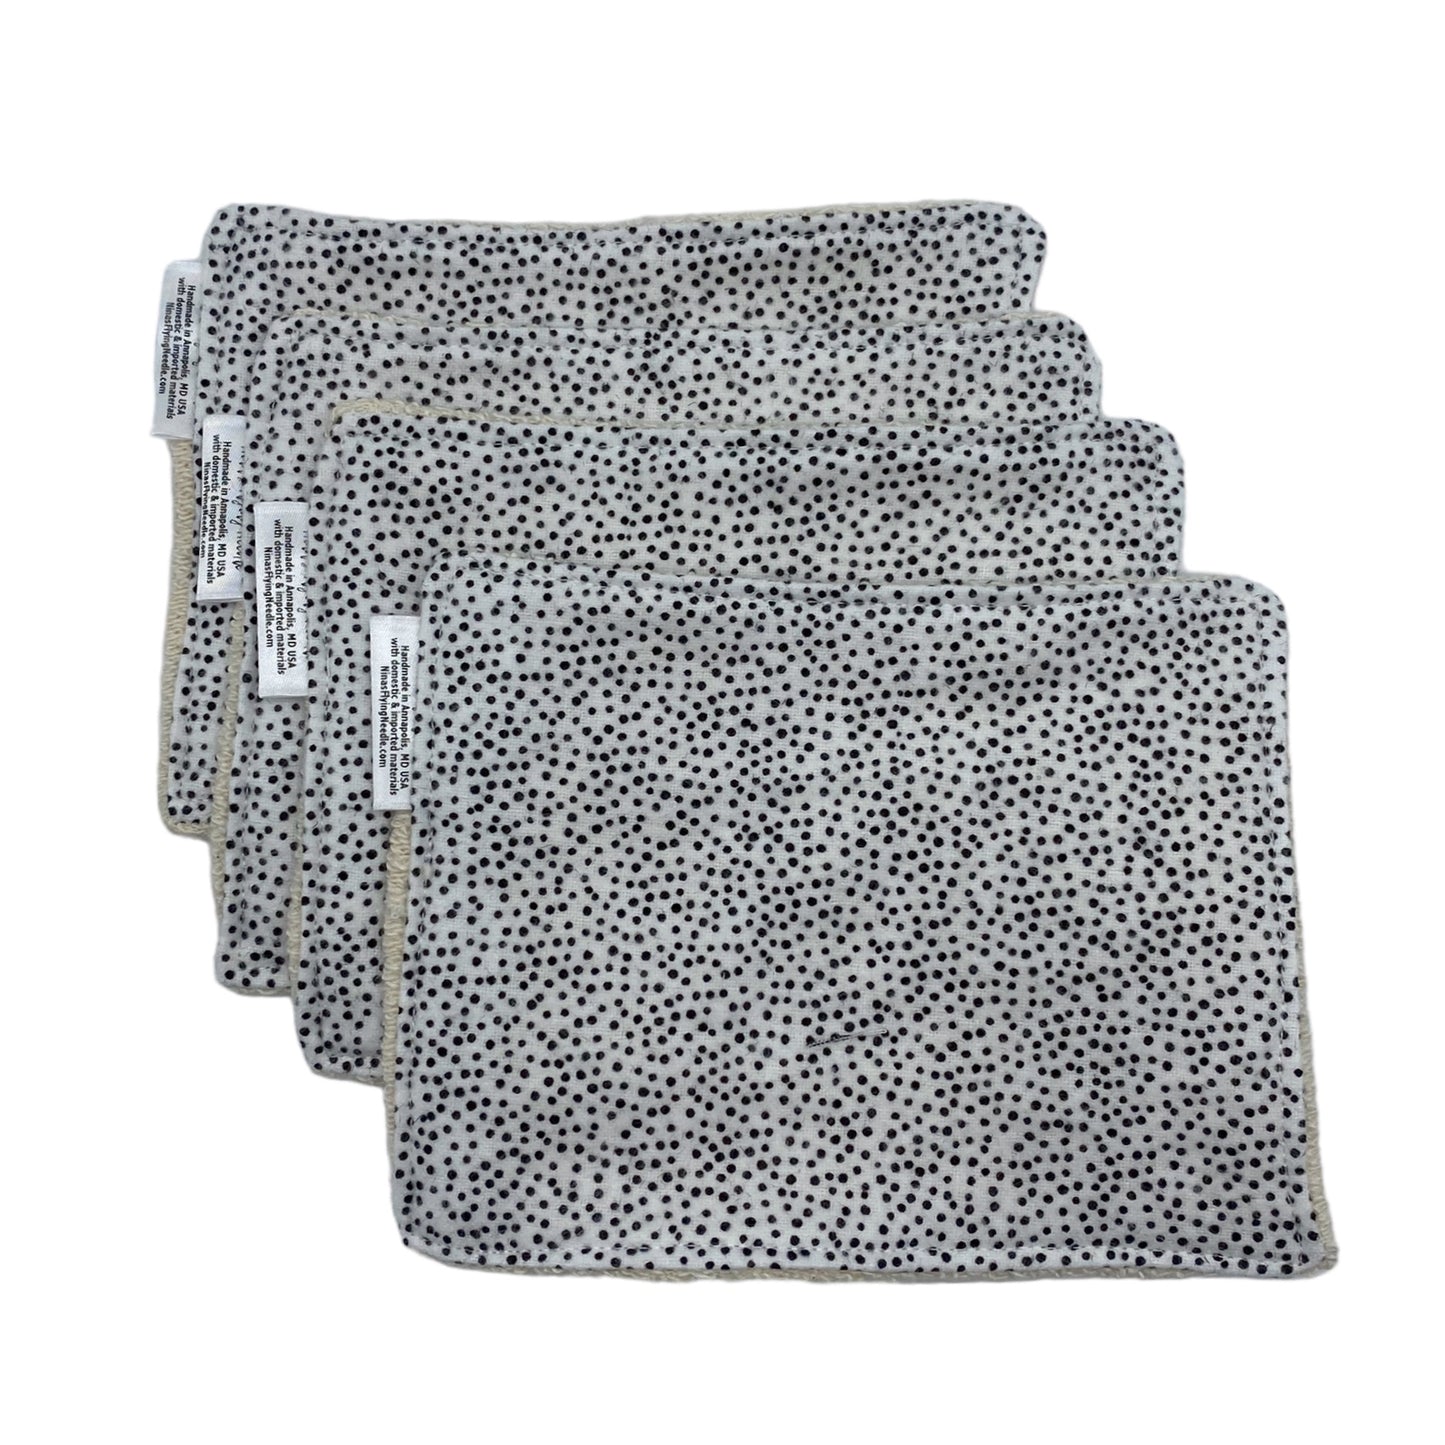 Wash Cloths - Minis - Dots - Black and White